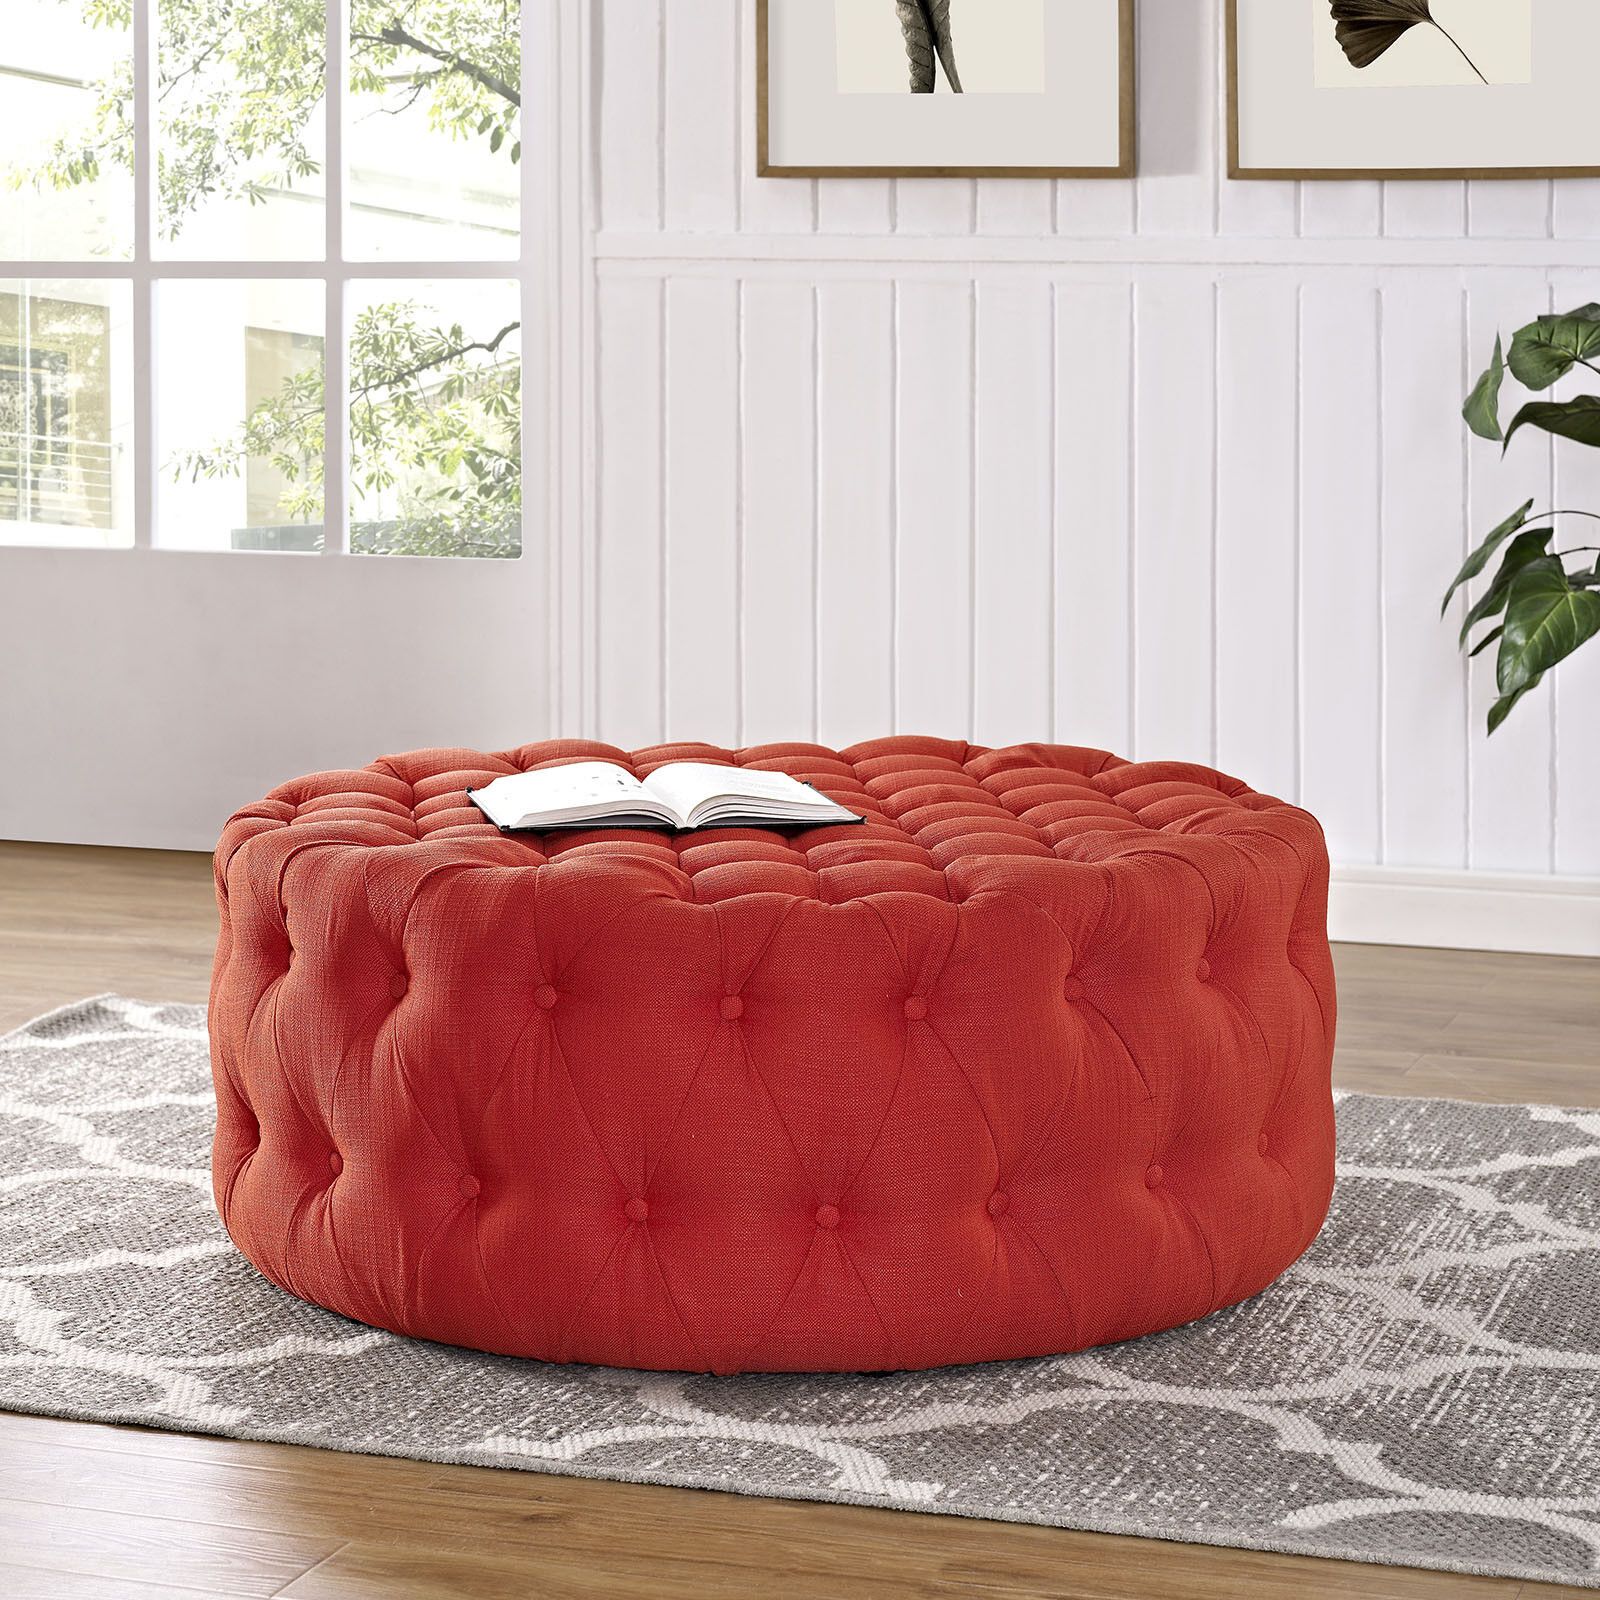 Button Tufted Fabric Upholstered Round Ottoman In Atomic Red Pertaining To Fabric Oversized Pouf Ottomans (View 5 of 20)